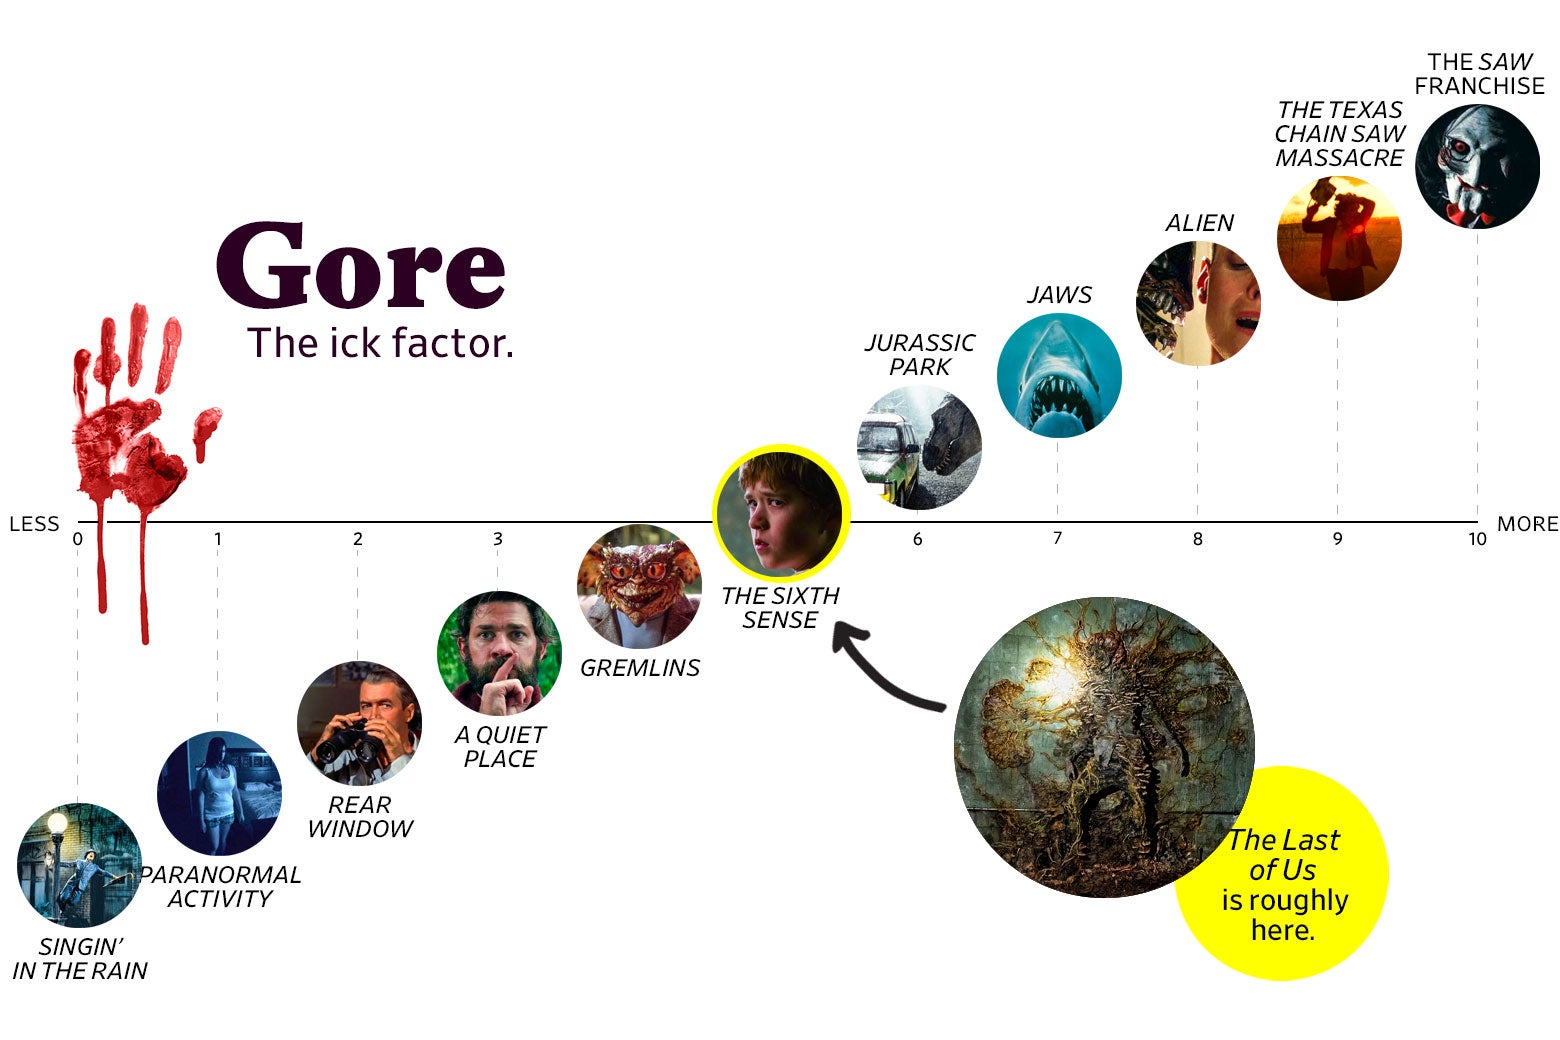 A chart titled “Gore: the Ick Factor” shows that The Last of Us ranks a 5 in goriness, roughly the same as The Sixth Sense. The scale ranges from Singin’ in the Rain (0) to the Saw franchise (10). 